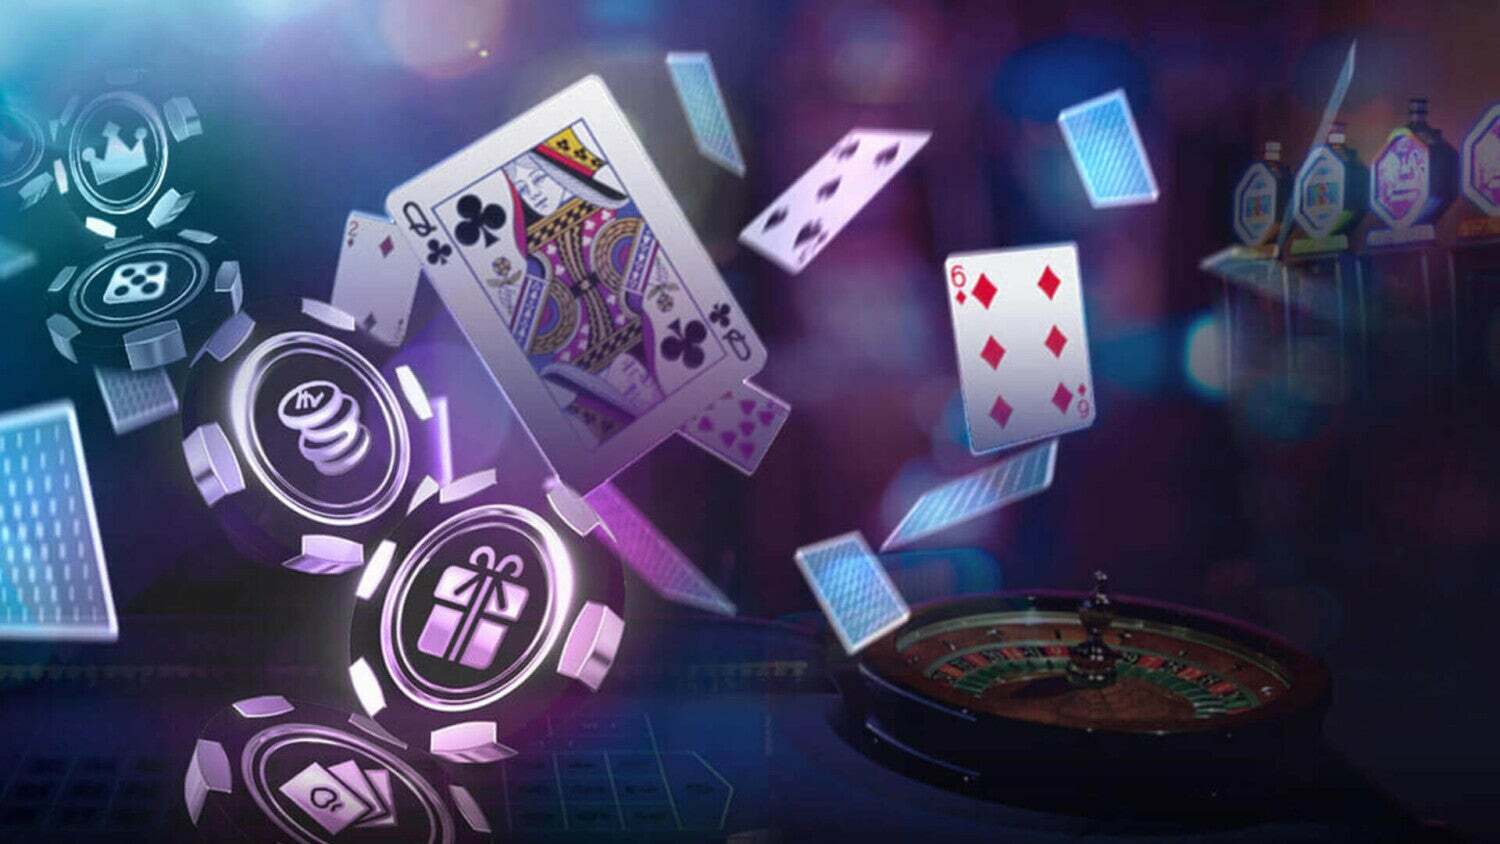 Don't Just Sit There! Start casino